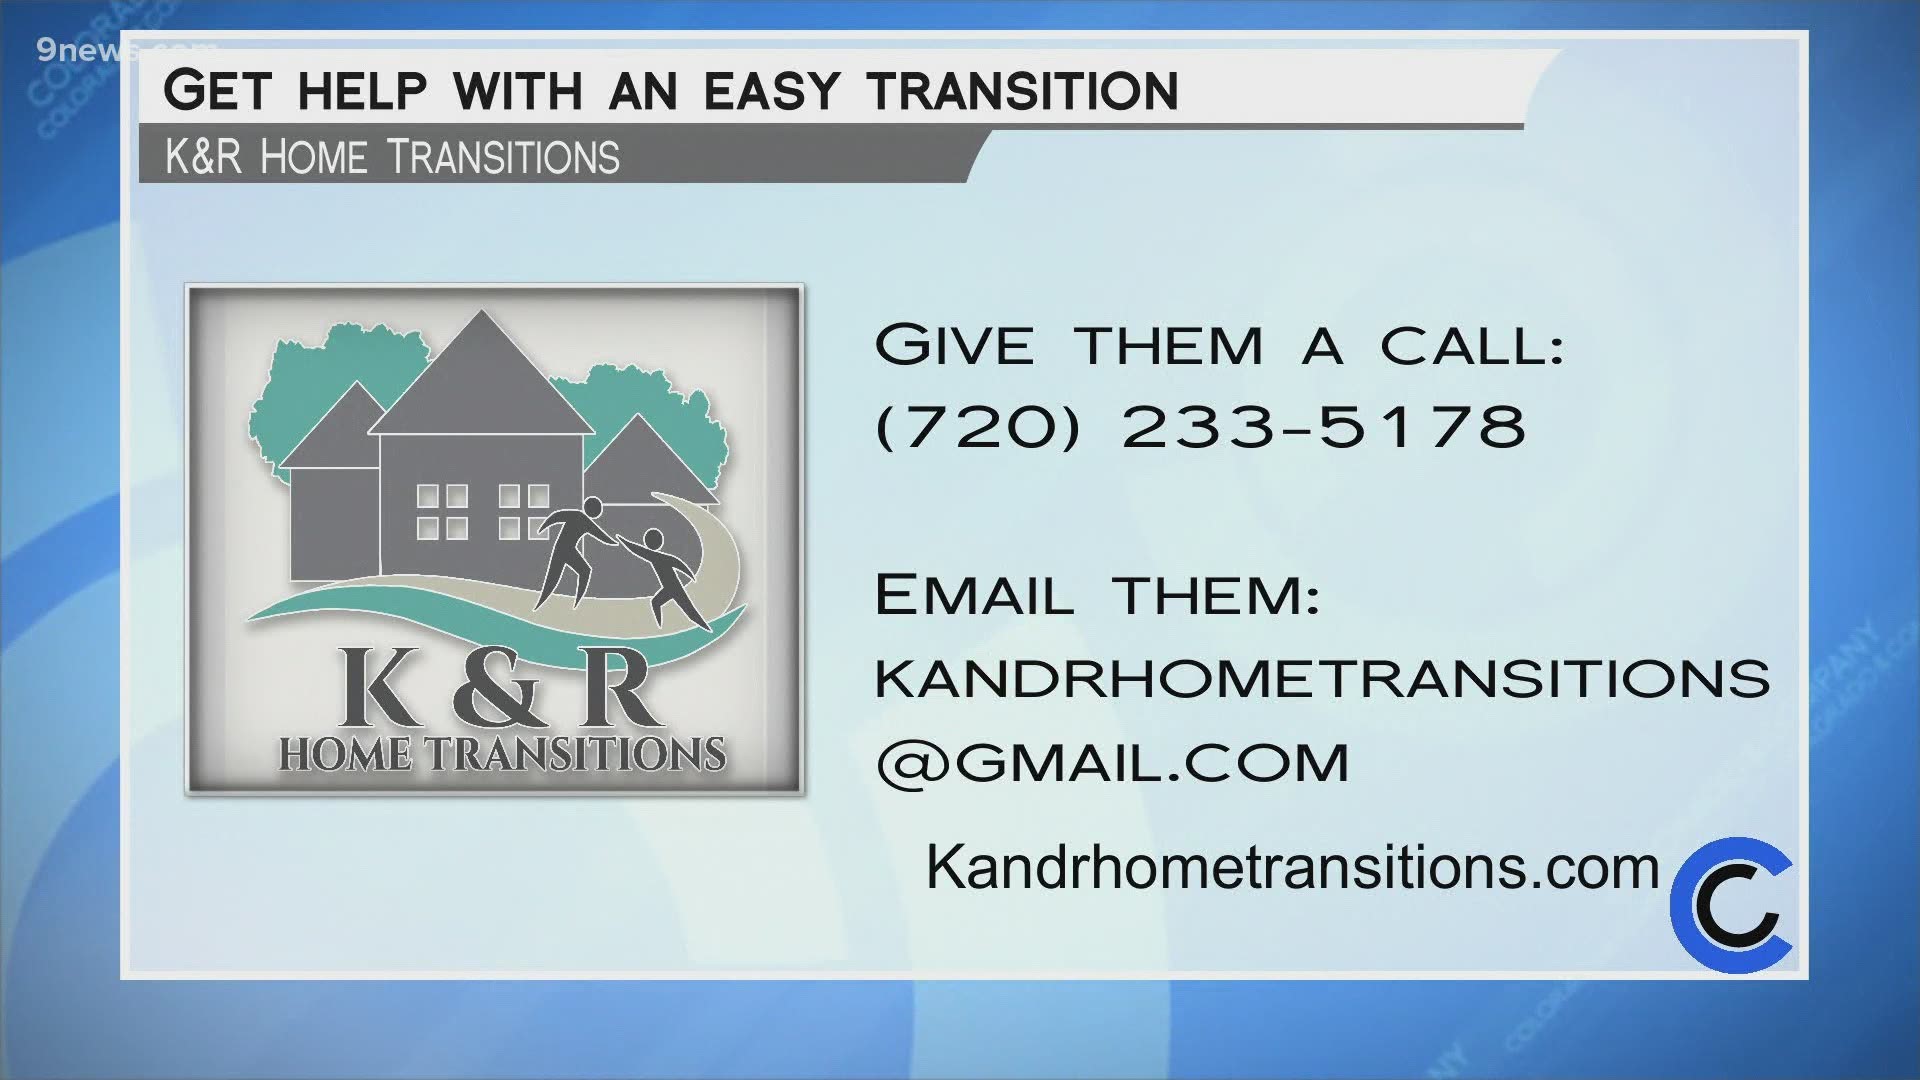 Call Kathryn and Robyn today at 720.233.5178 or email them at KandRHomeTransitions@gmail.com to learn more about how they can help you.